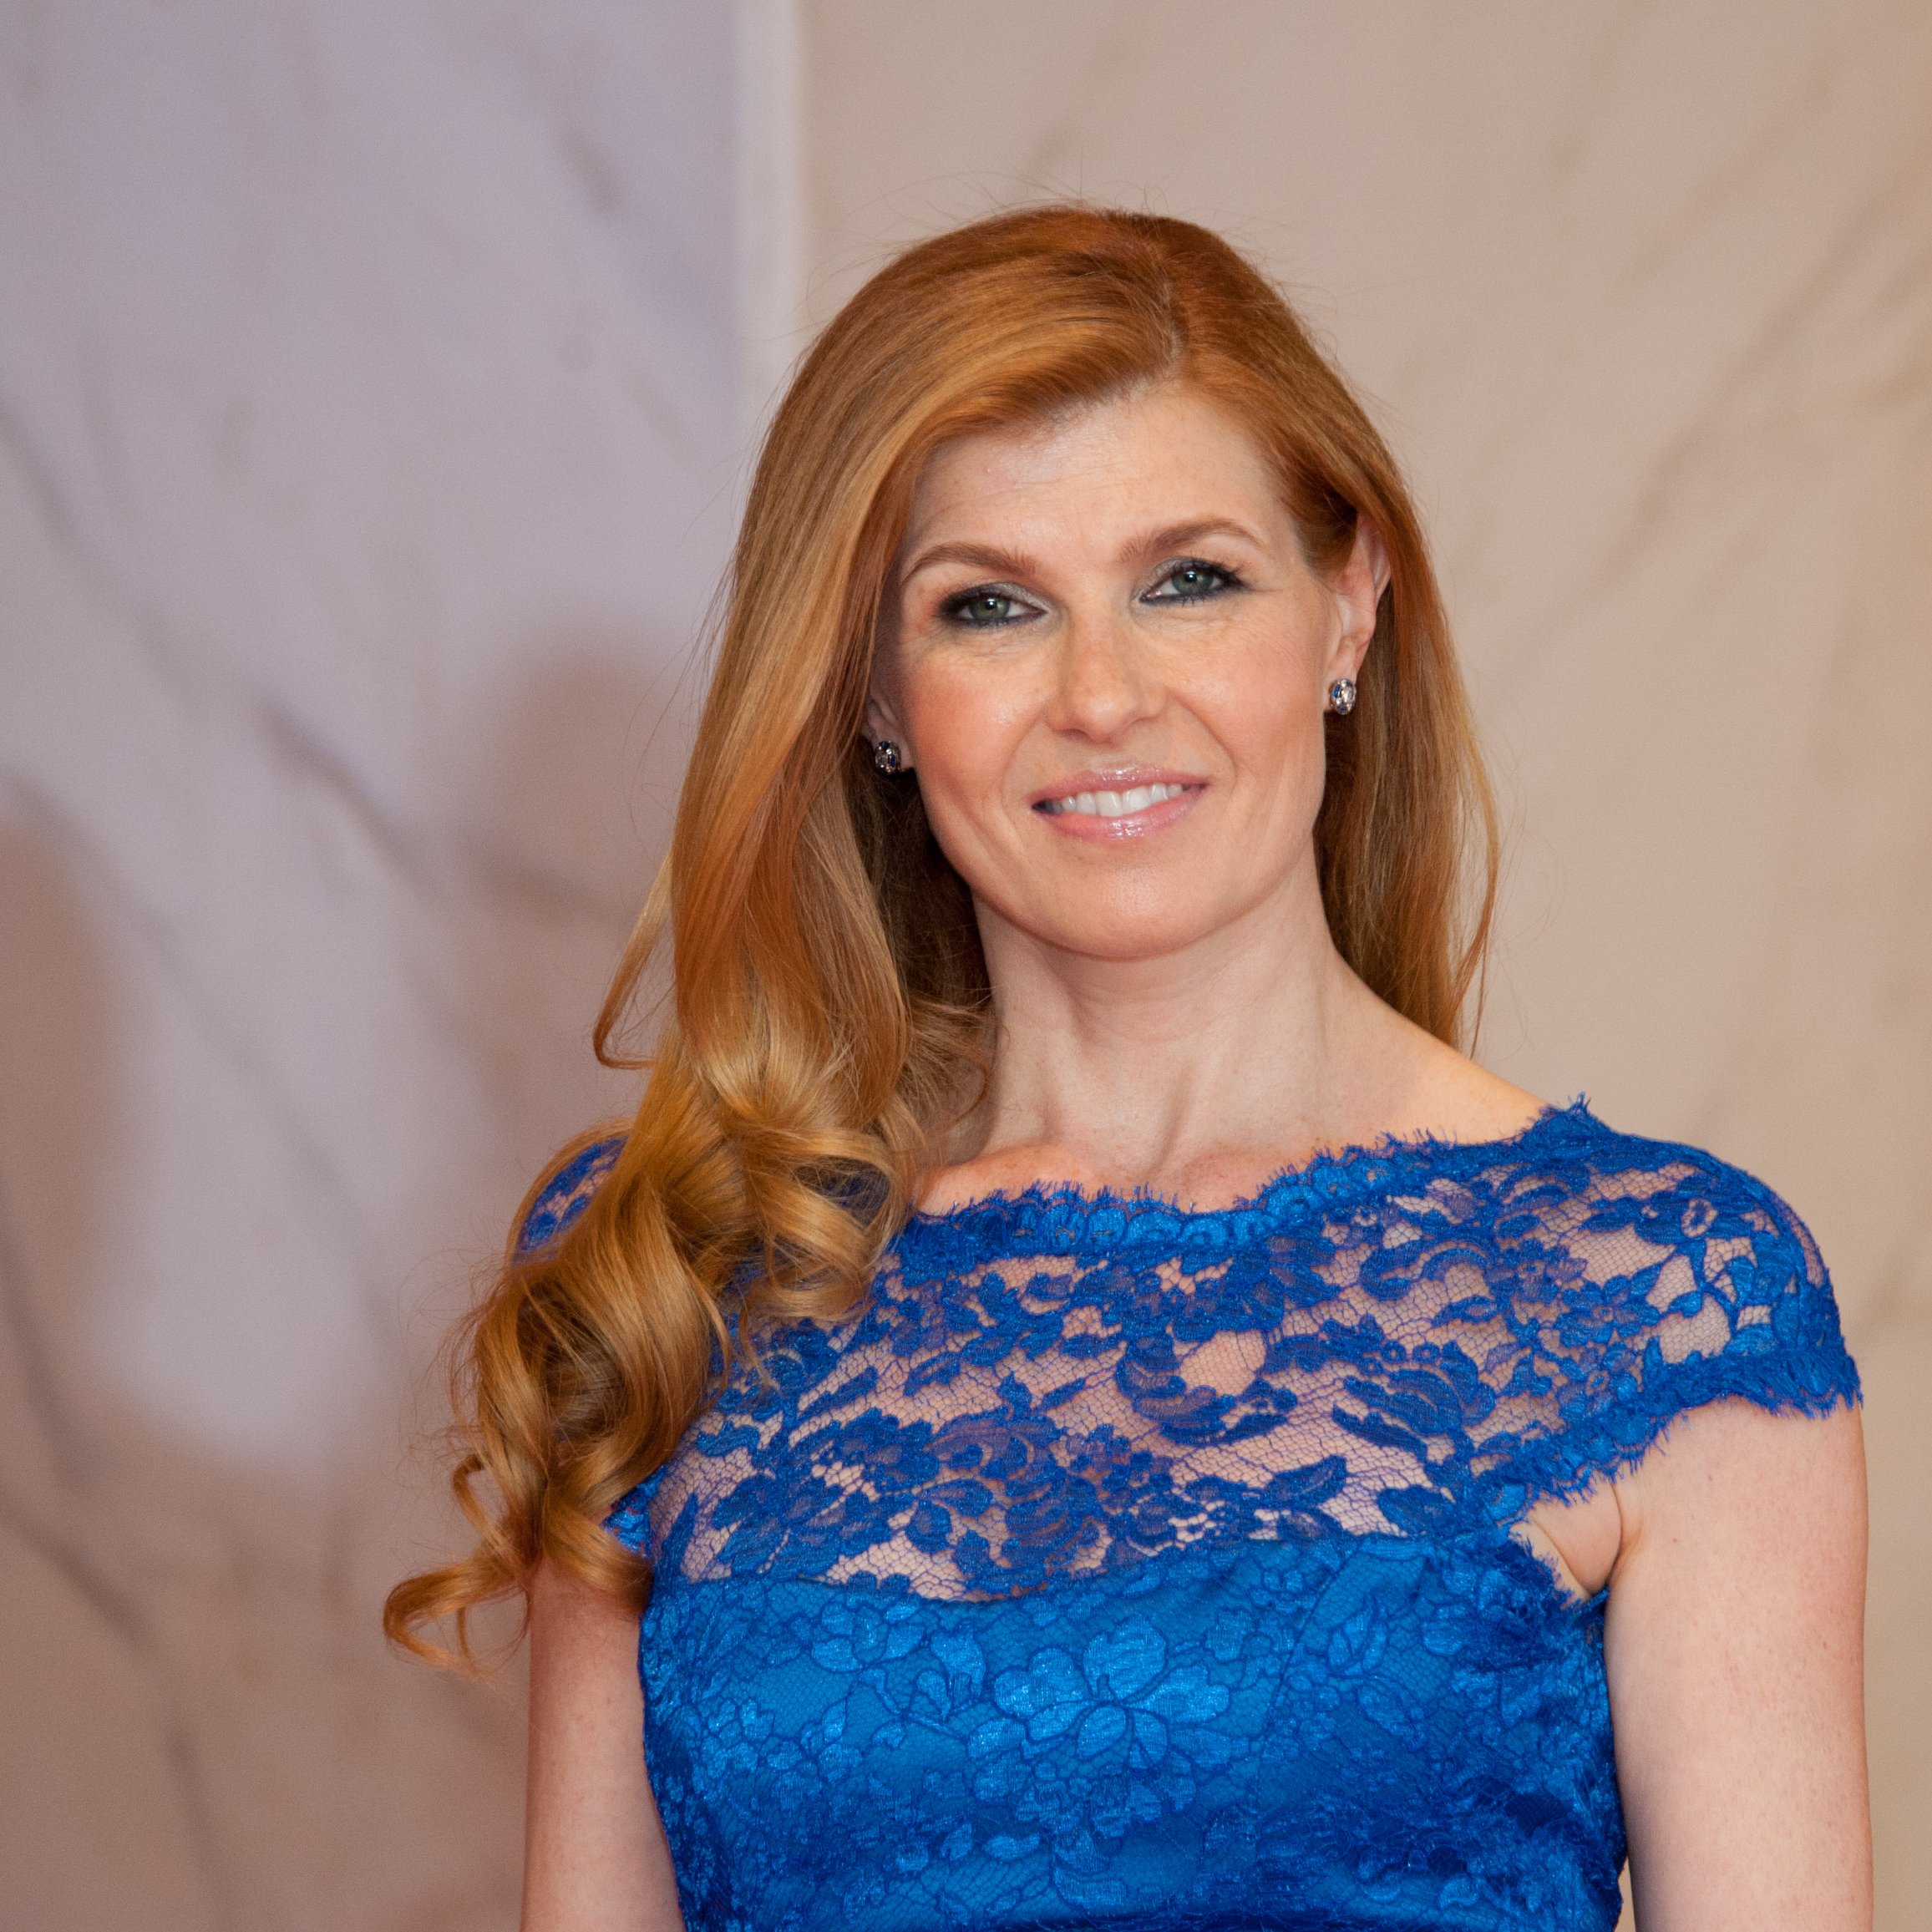 Connie Britton arrives at the White House Correspondents Dinner on April 27, 2013. | Photo: Shutterstock.